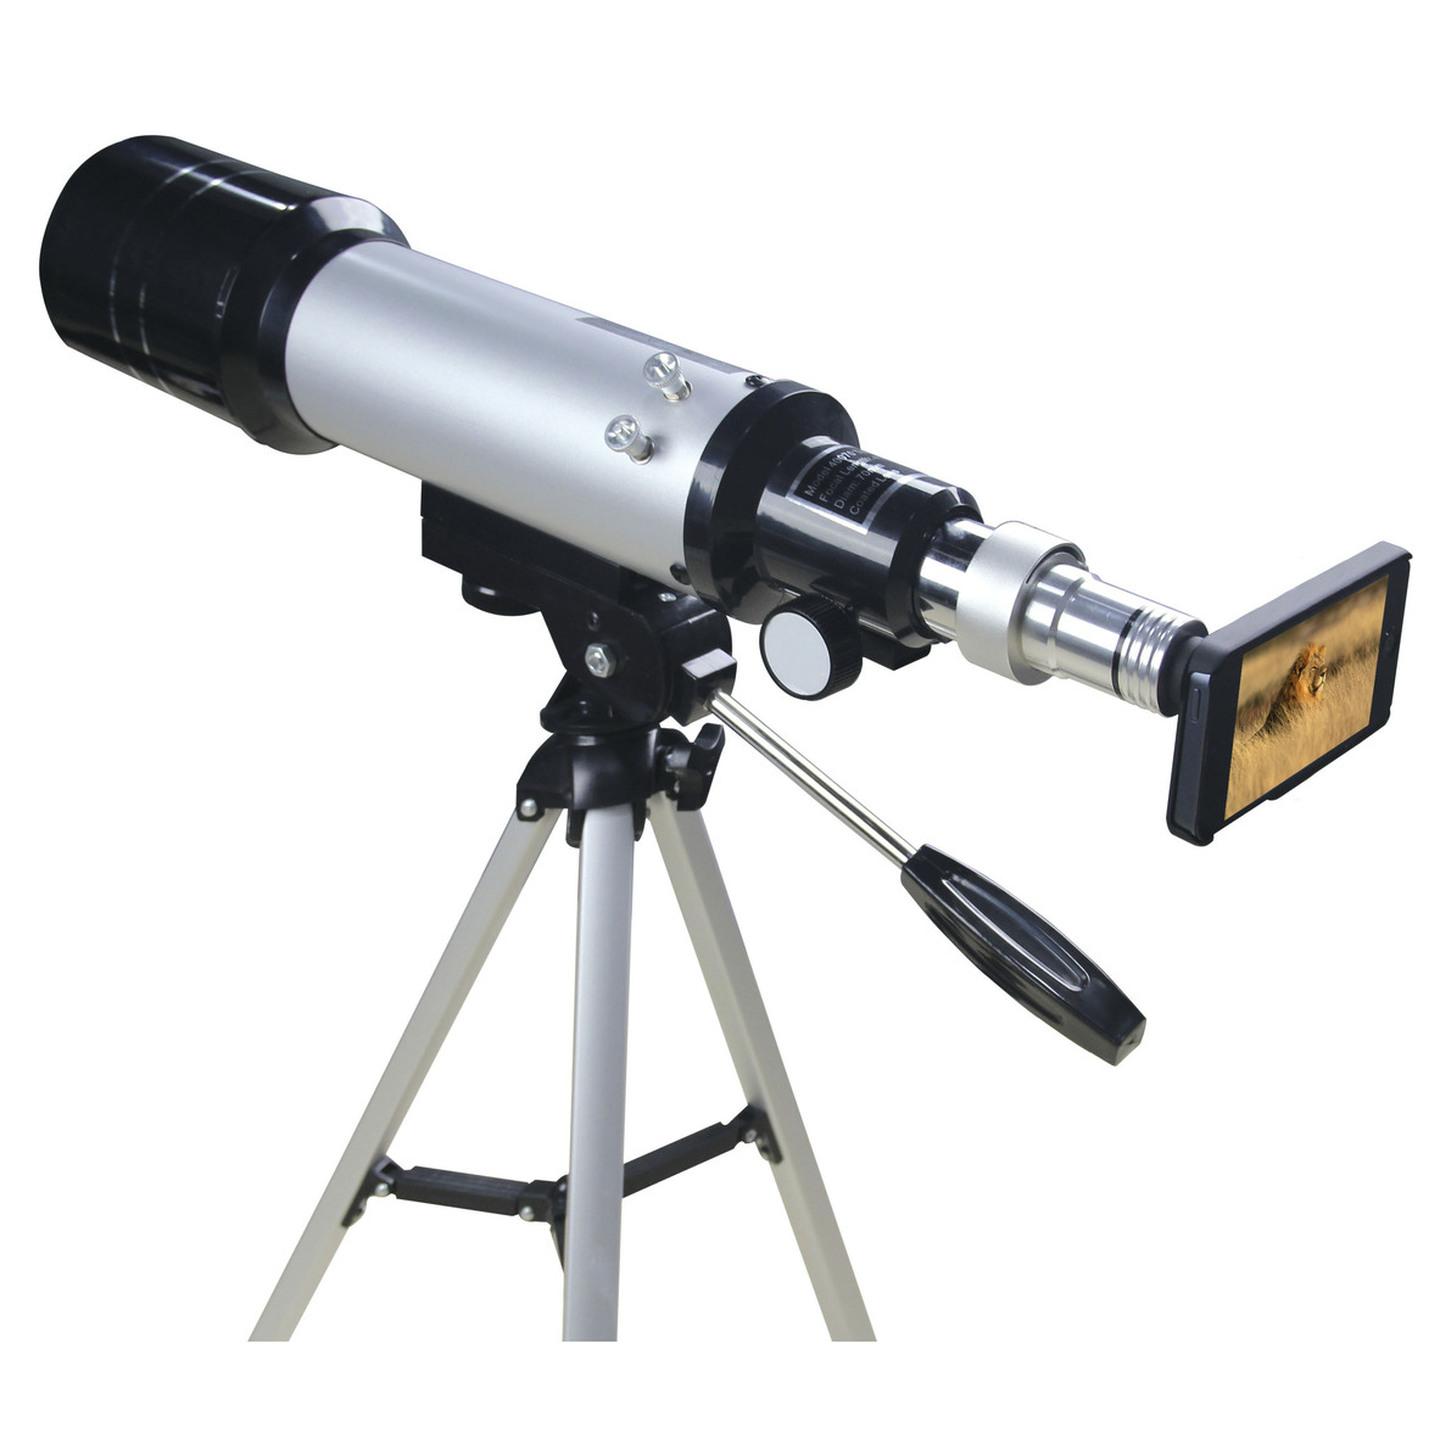 50X Spotting Scope with Smartphone Viewing Attachment